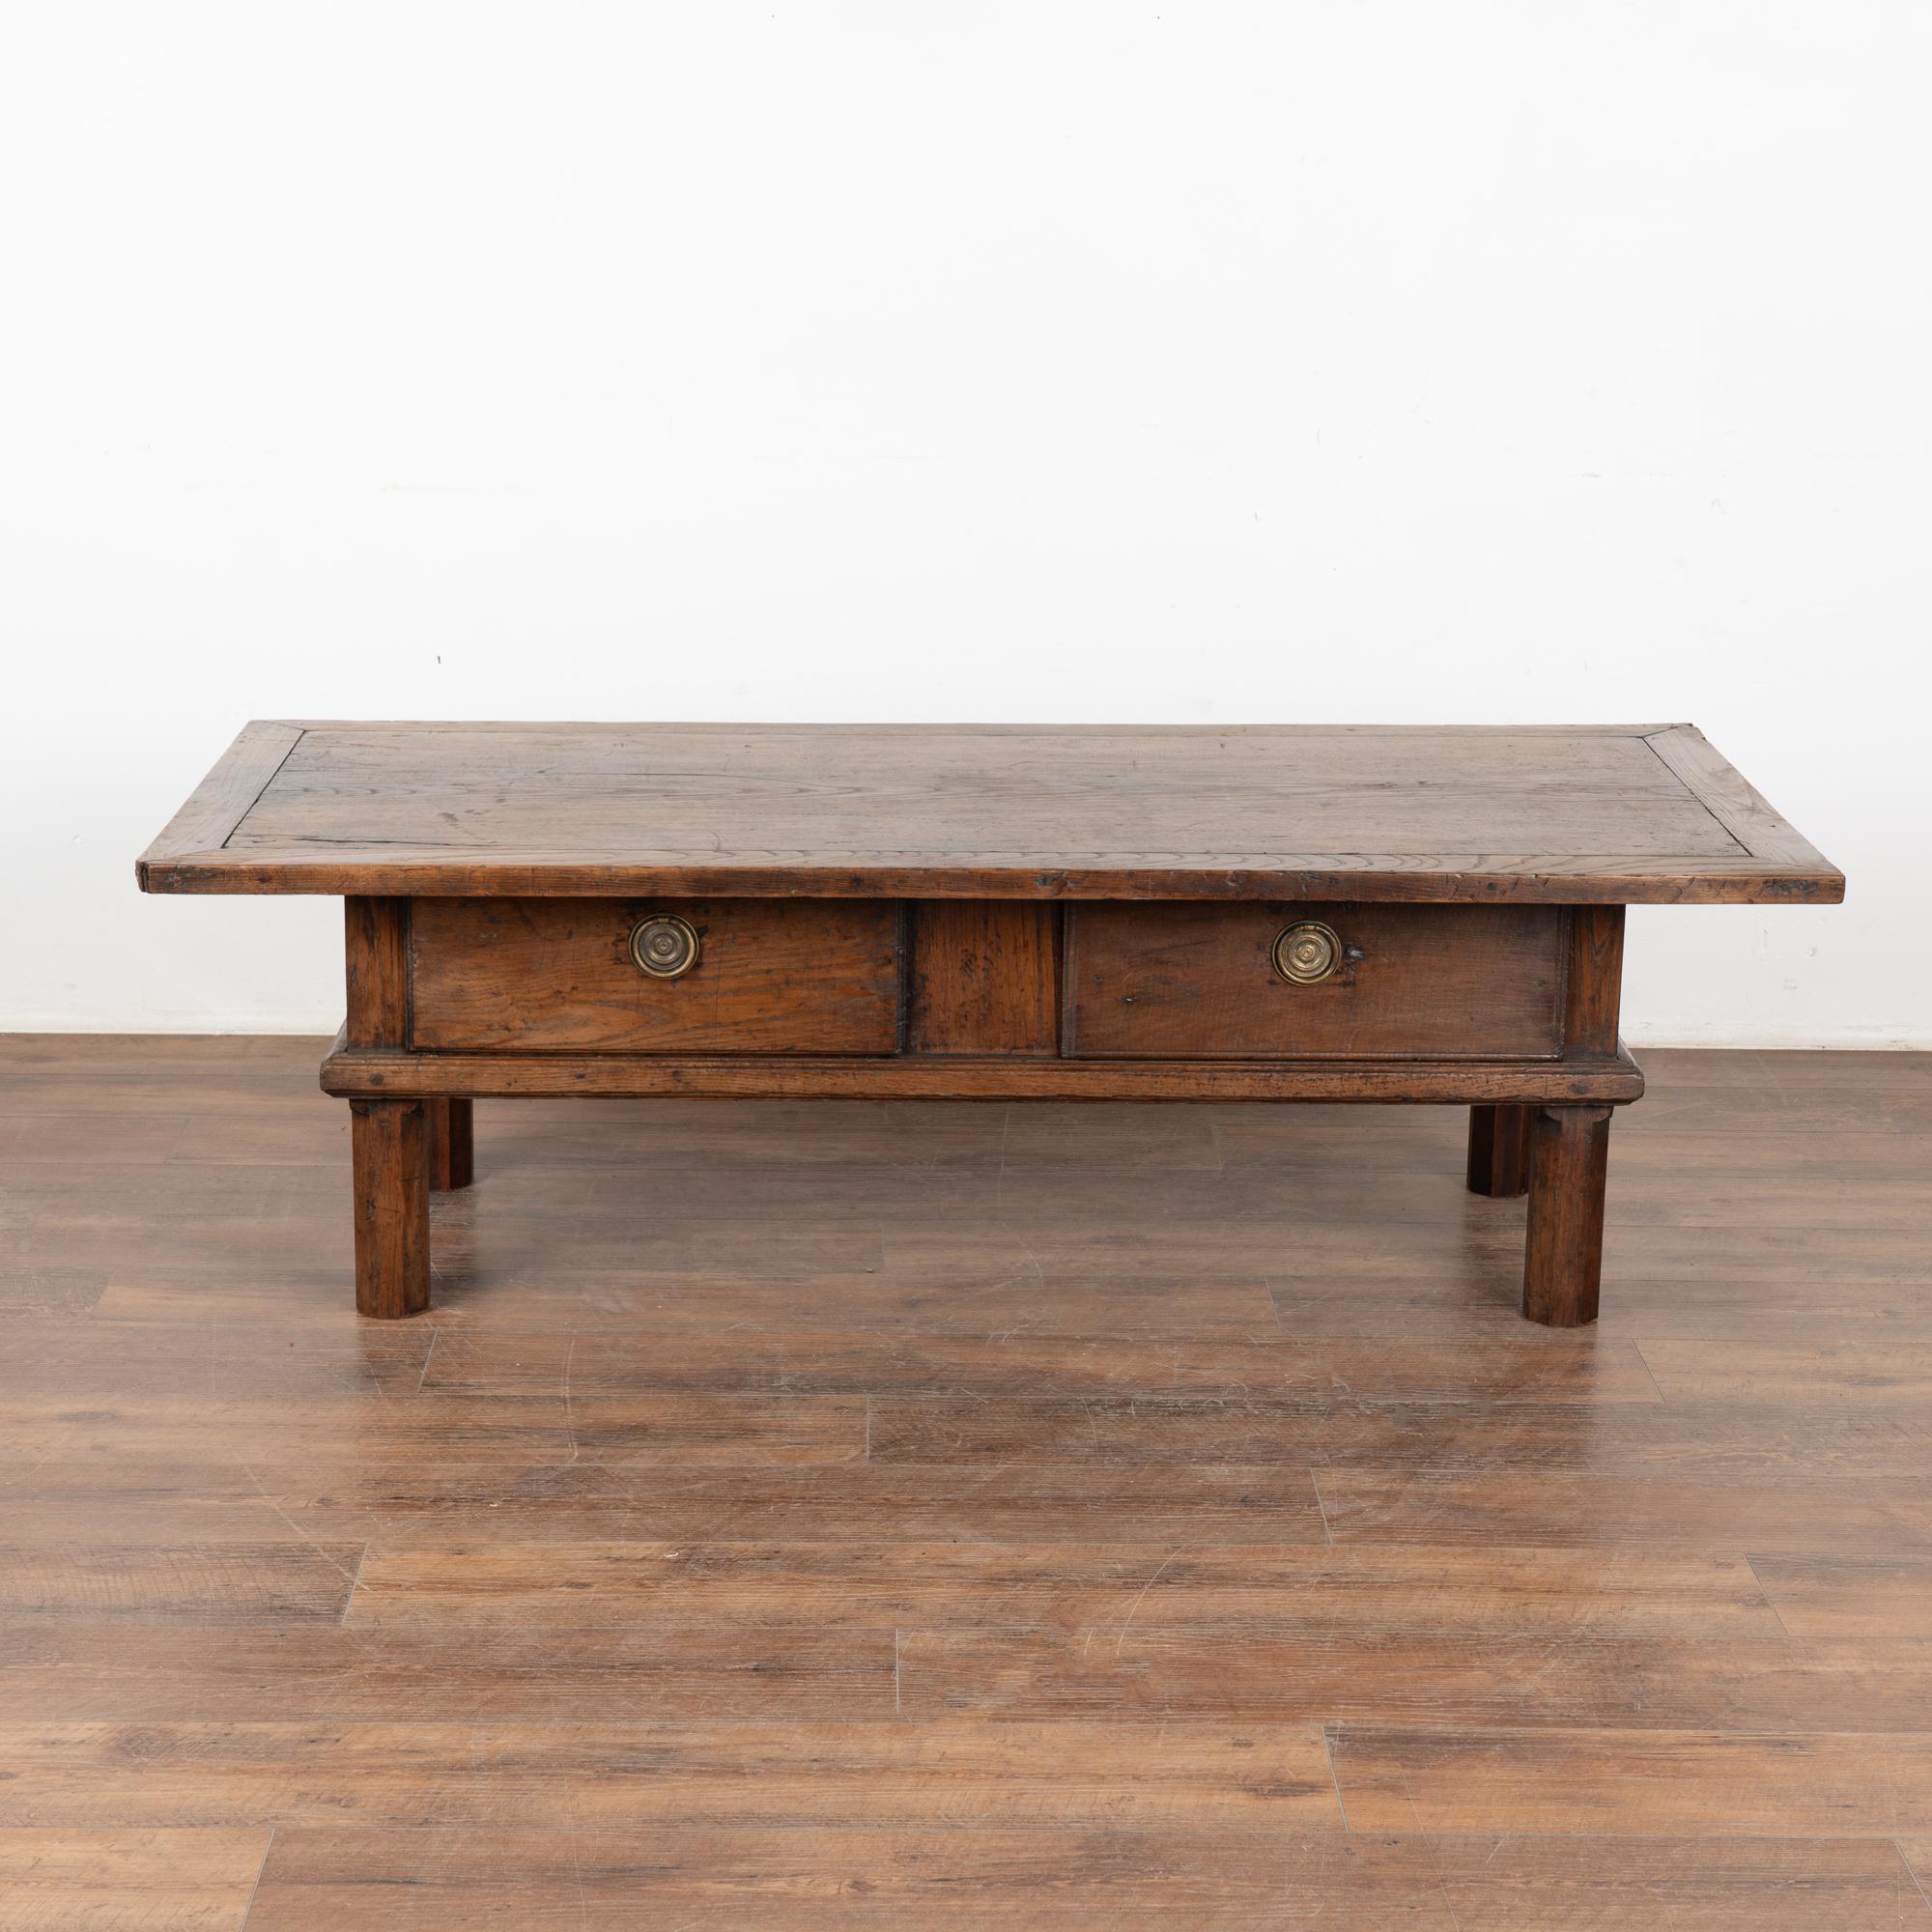 19th Century French Country Two Drawer Coffee Table, circa 1820-40